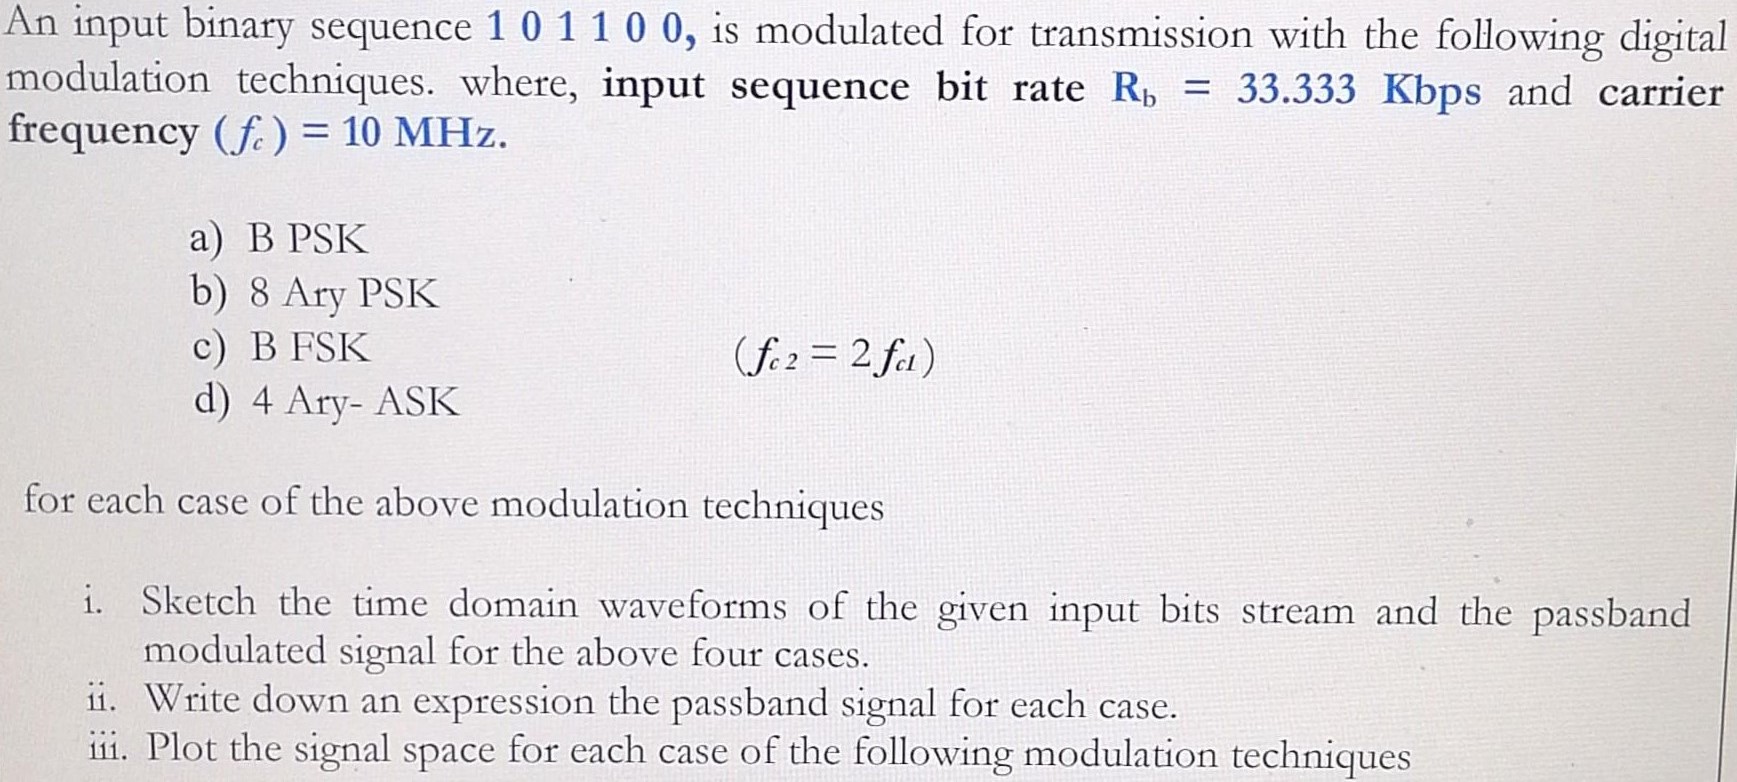 An input binary sequence 1 0 1 1 0 0, is modulated for transmission with the following digital modulation techniques. where, input sequence bit rate Rb = 33.333 Kbps and carrier frequency (fc) = 10 MHz. a) B PSK b) 8 Ary PSK c) B FSK d) 4 Ary-ASK (fc2 = 2 fc1) for each case of the above modulation techniques i. Sketch the time domain waveforms of the given input bits stream and the passband modulated signal for the above four cases. ii. Write down an expression the passband signal for each case. iii. Plot the signal space for each case of the following modulation techniques